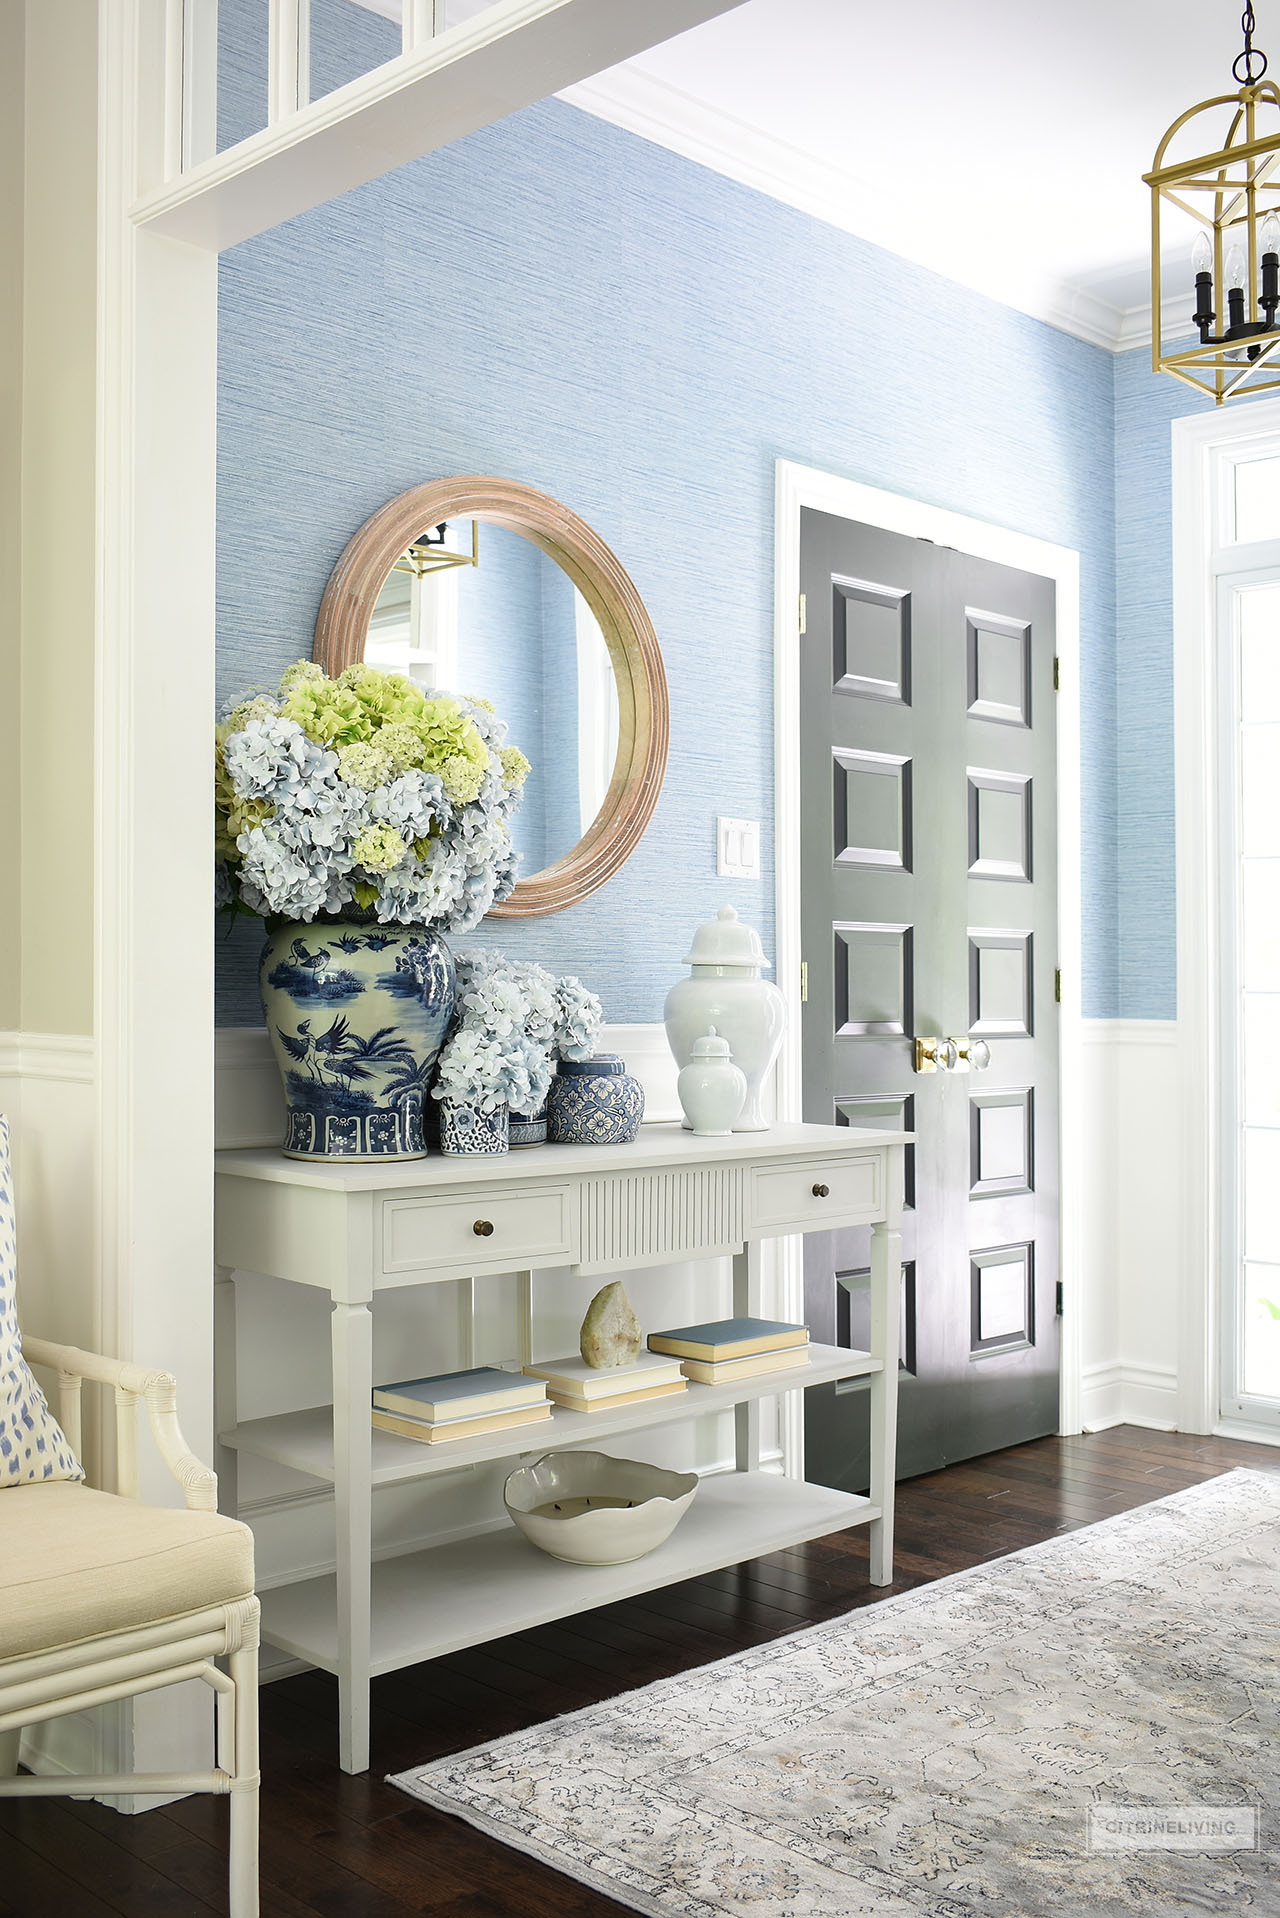 Entryway decorated for summer with beautiful blue and white ginger jars, blue and green hydrangeas in a full, large arrangement and simple accessories styled on a clean-lined console table.